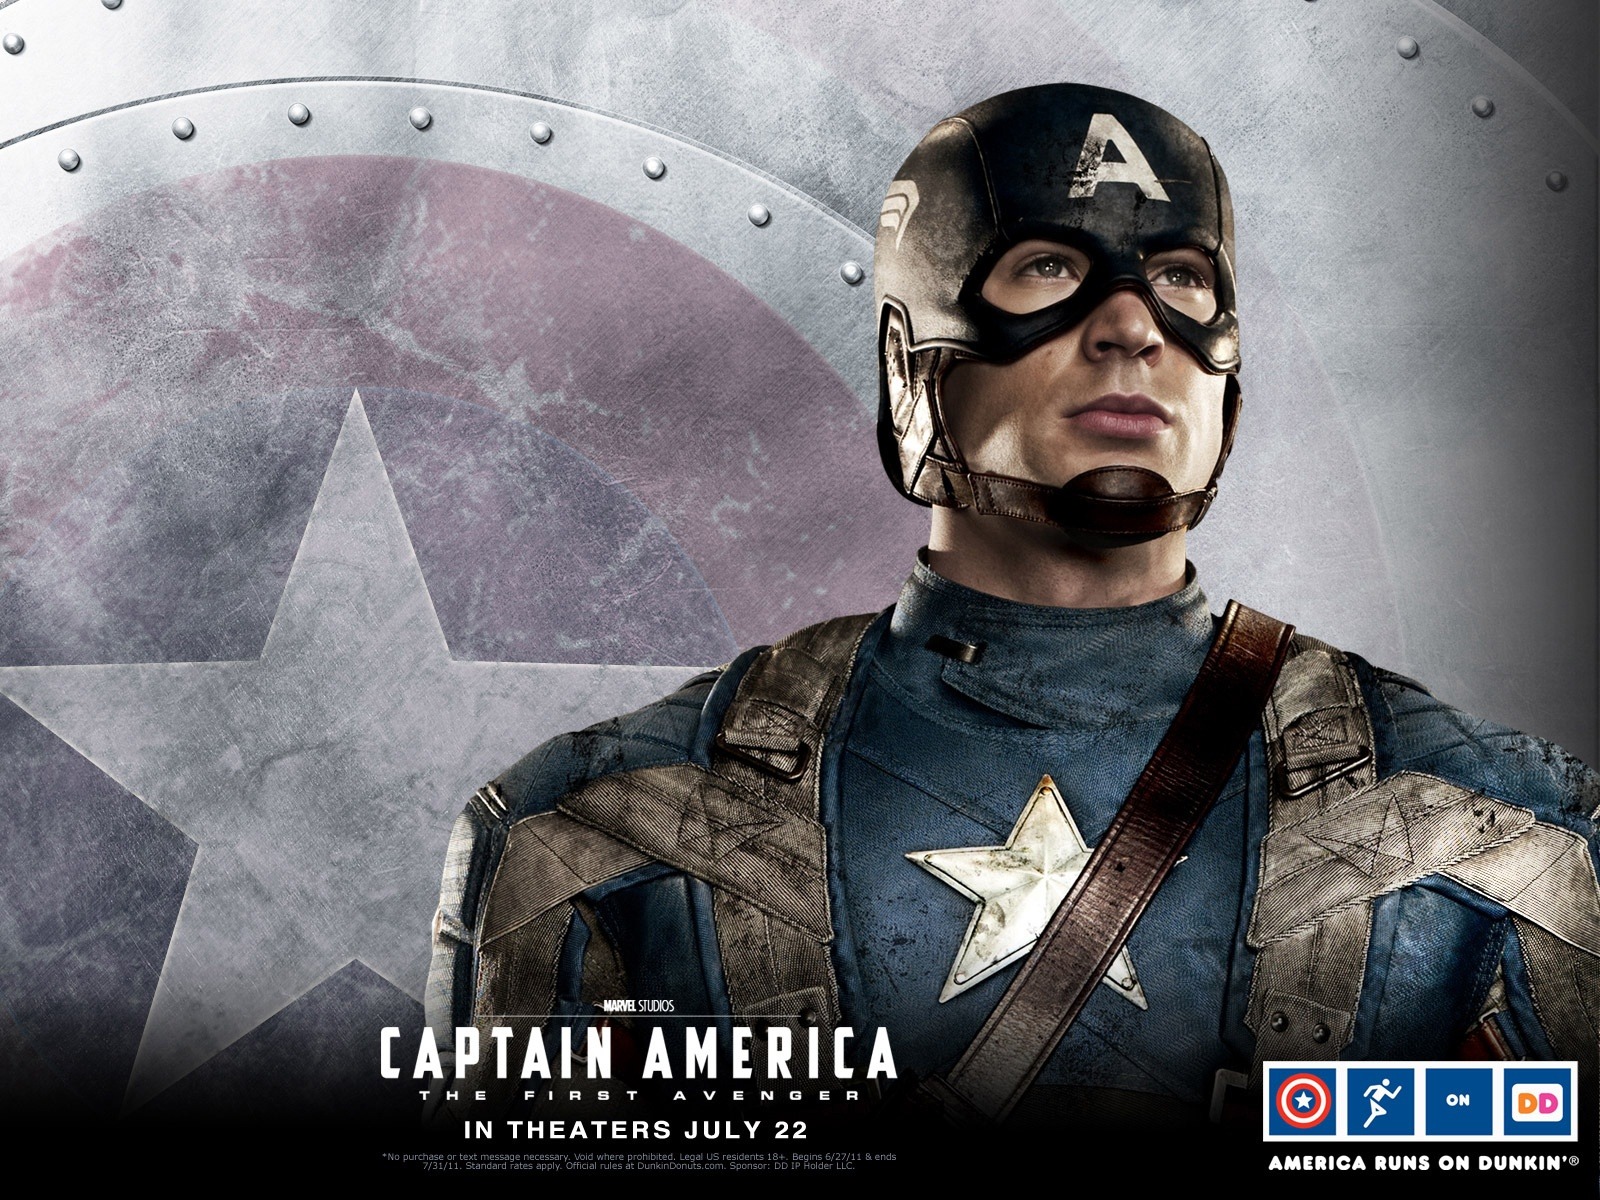 Captain America: The First Avenger wallpapers HD #5 - 1600x1200